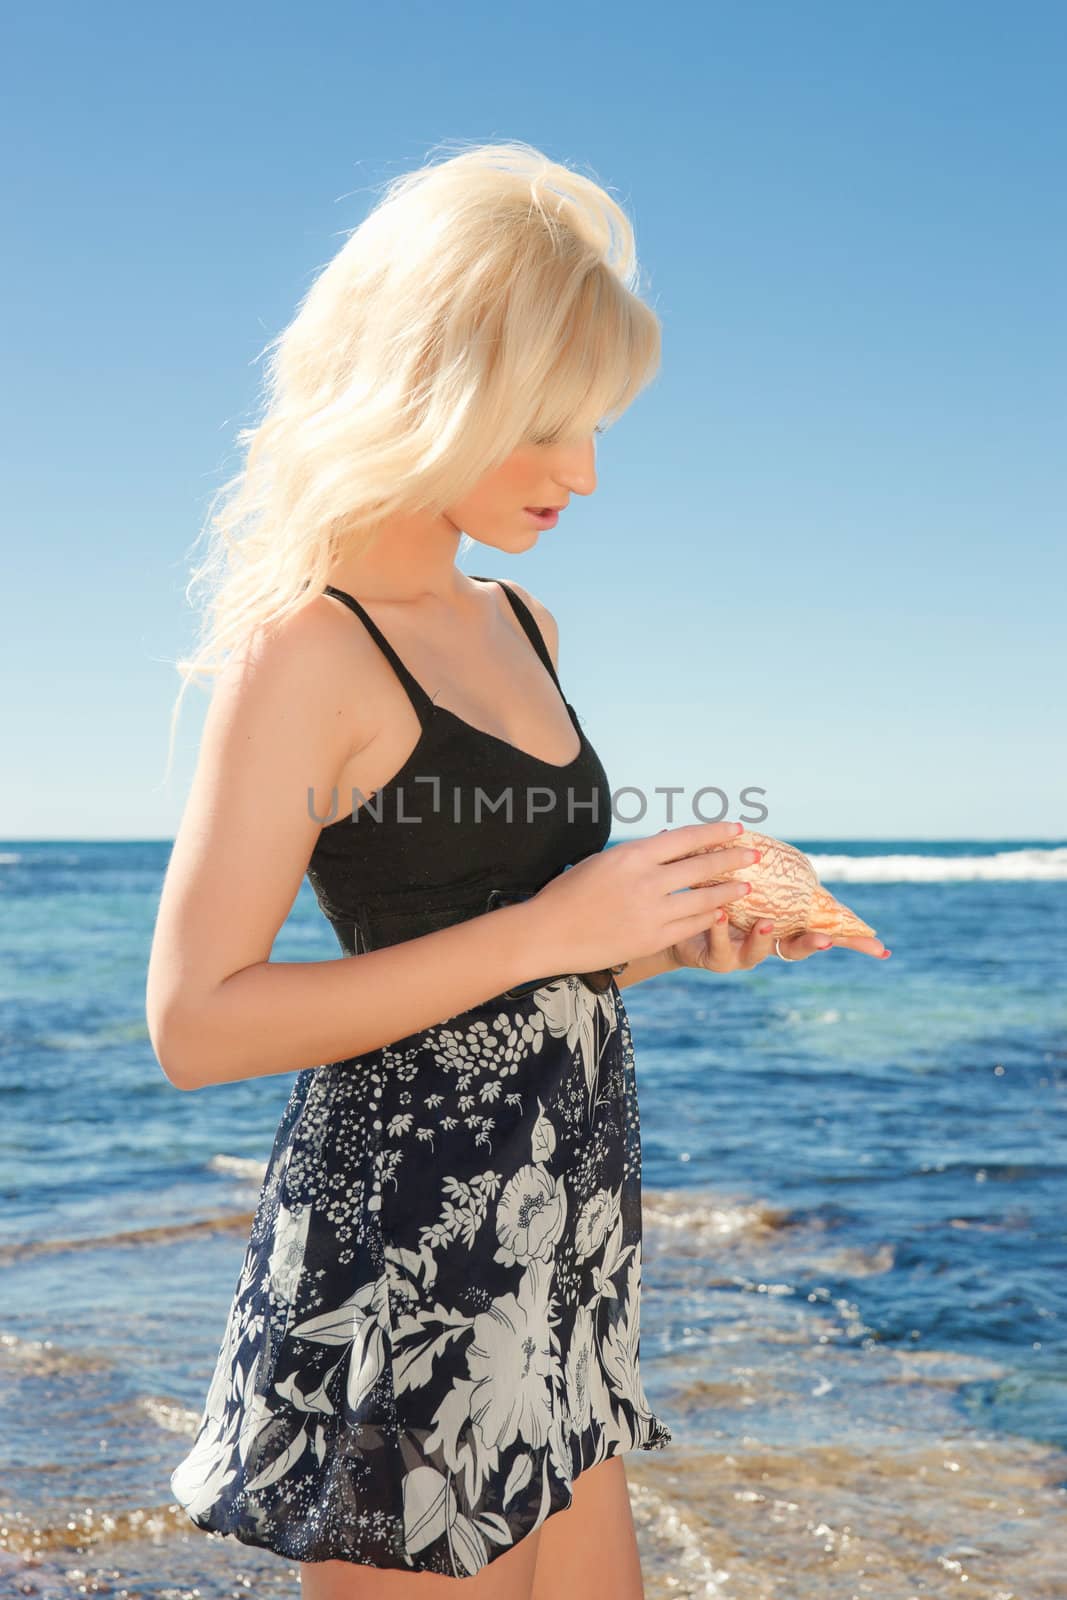 young woman on reef at sea by clearviewstock